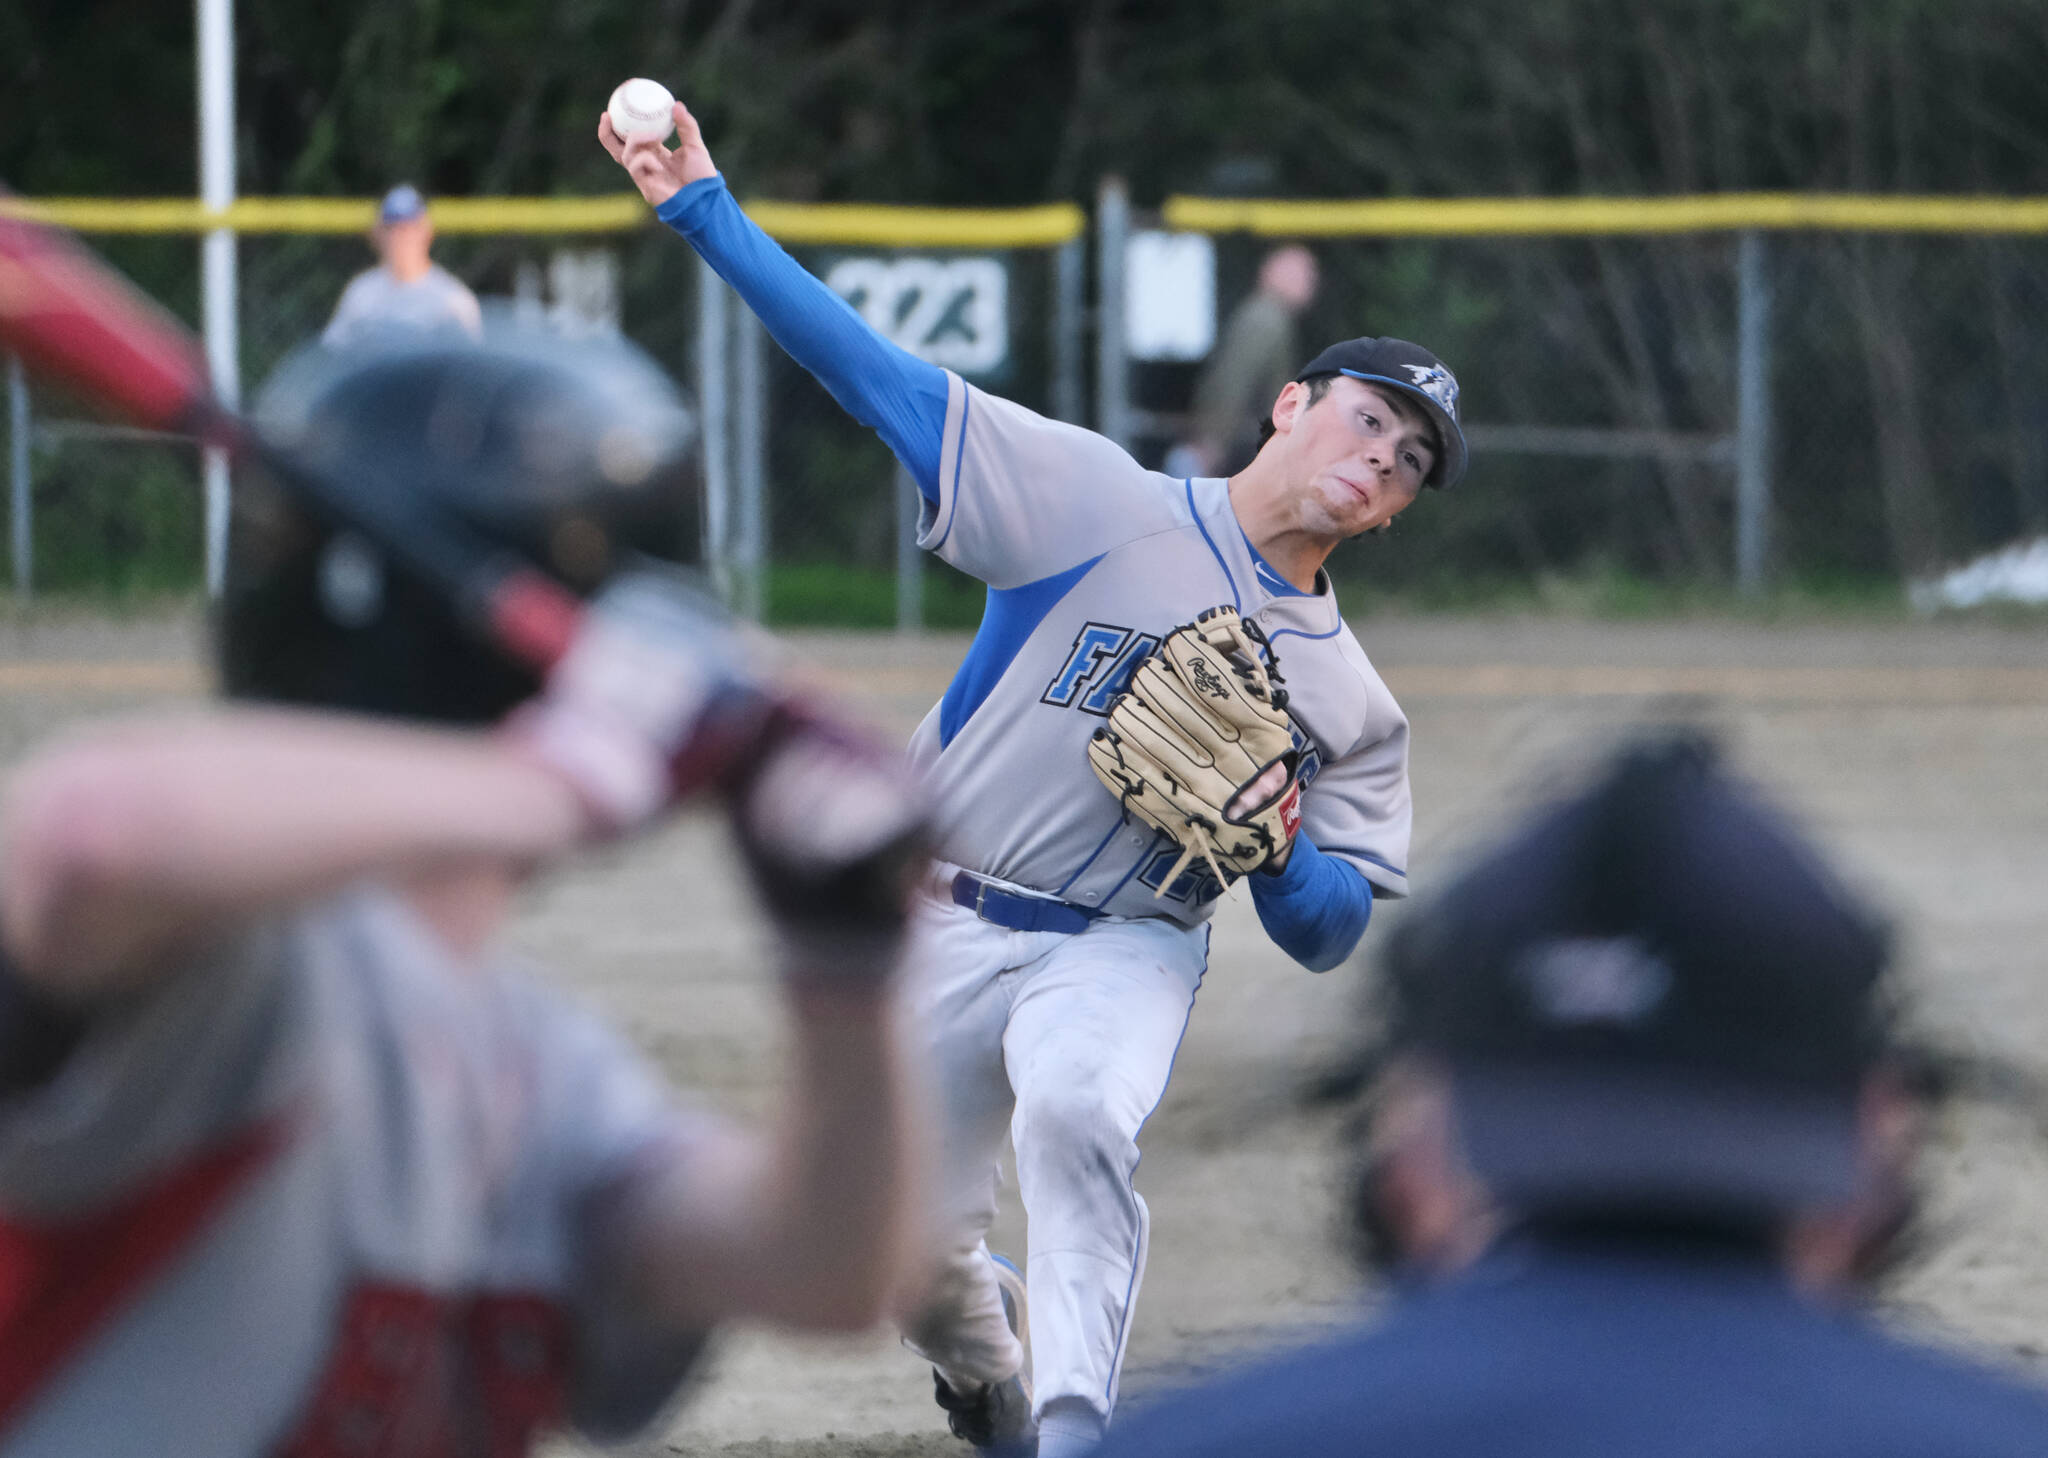 Thunder Mountain High School pitcher Anthony Anderson delivers against Juneau-Douglas High School: Yadaa.at Kalé during the Falcons’ loss to the Crimson Bears on Tuesday at Adair-Kennedy Field. The teams meet again tonight at 6:30 p.m. (Klas Stolpe / Juneau Empire)